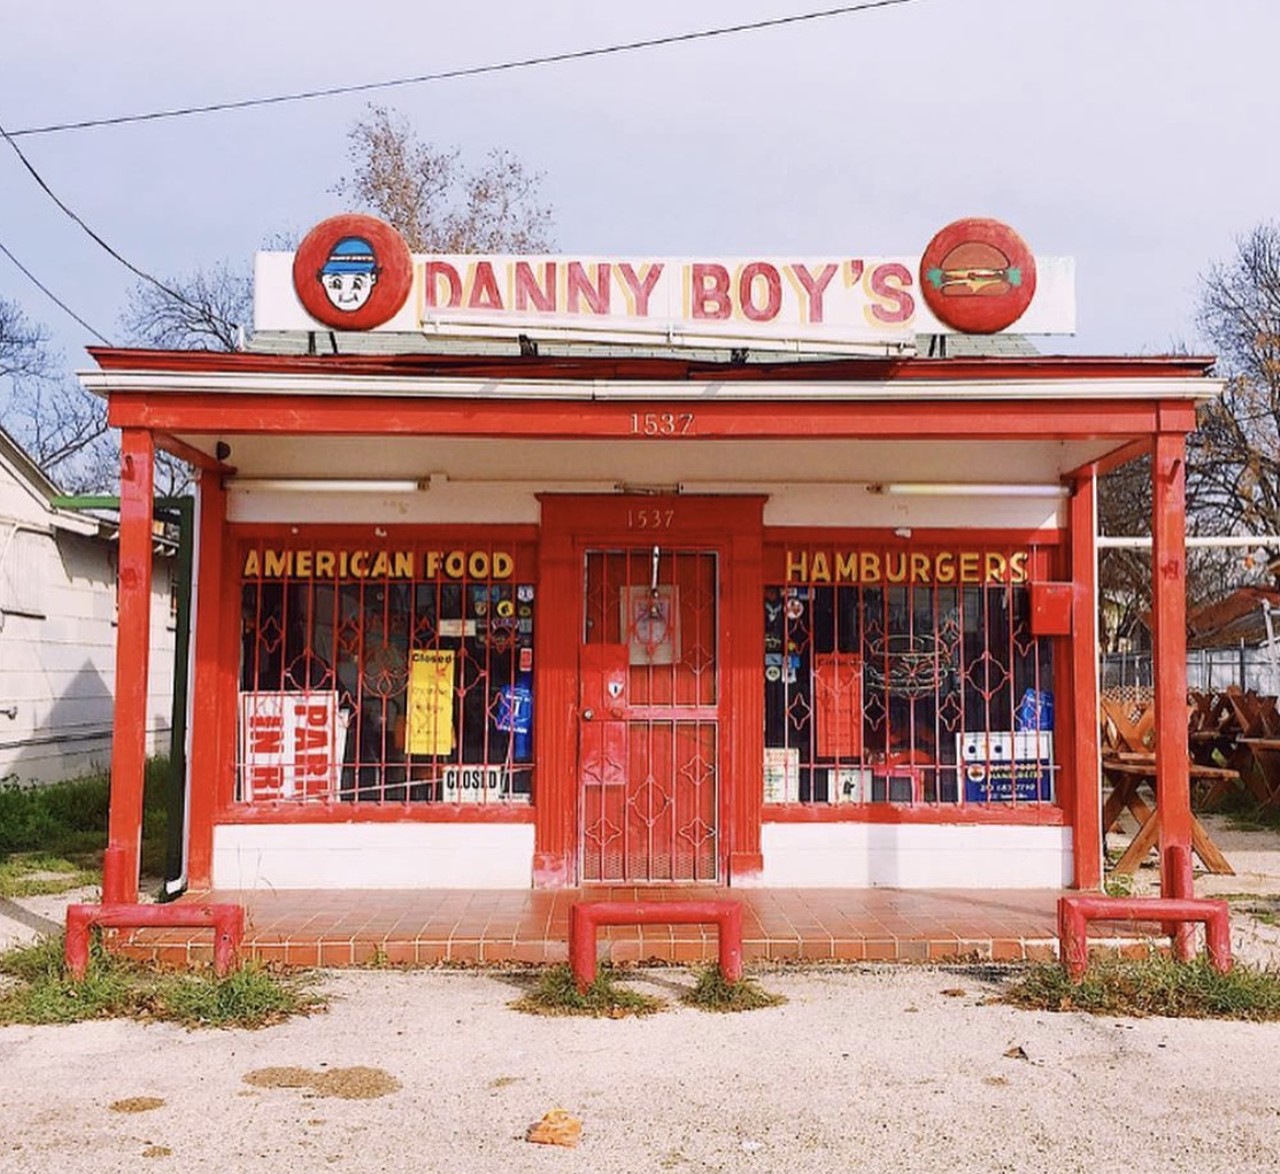 25. Danny Boy's Hamburgers
1537 W. Summit Ave., (210) 736-1665, facebook.com/Danny-Boys-Hamburgers-273701852680767
"Amazing burgers!!! Best in the world! After trying burgers in France, Australia, UK, NYC, San Fran, Kansas City, Austin, Houston and many other places. This is the BEST!!!" – Andy A.
Photo via Instagram / dreynicole